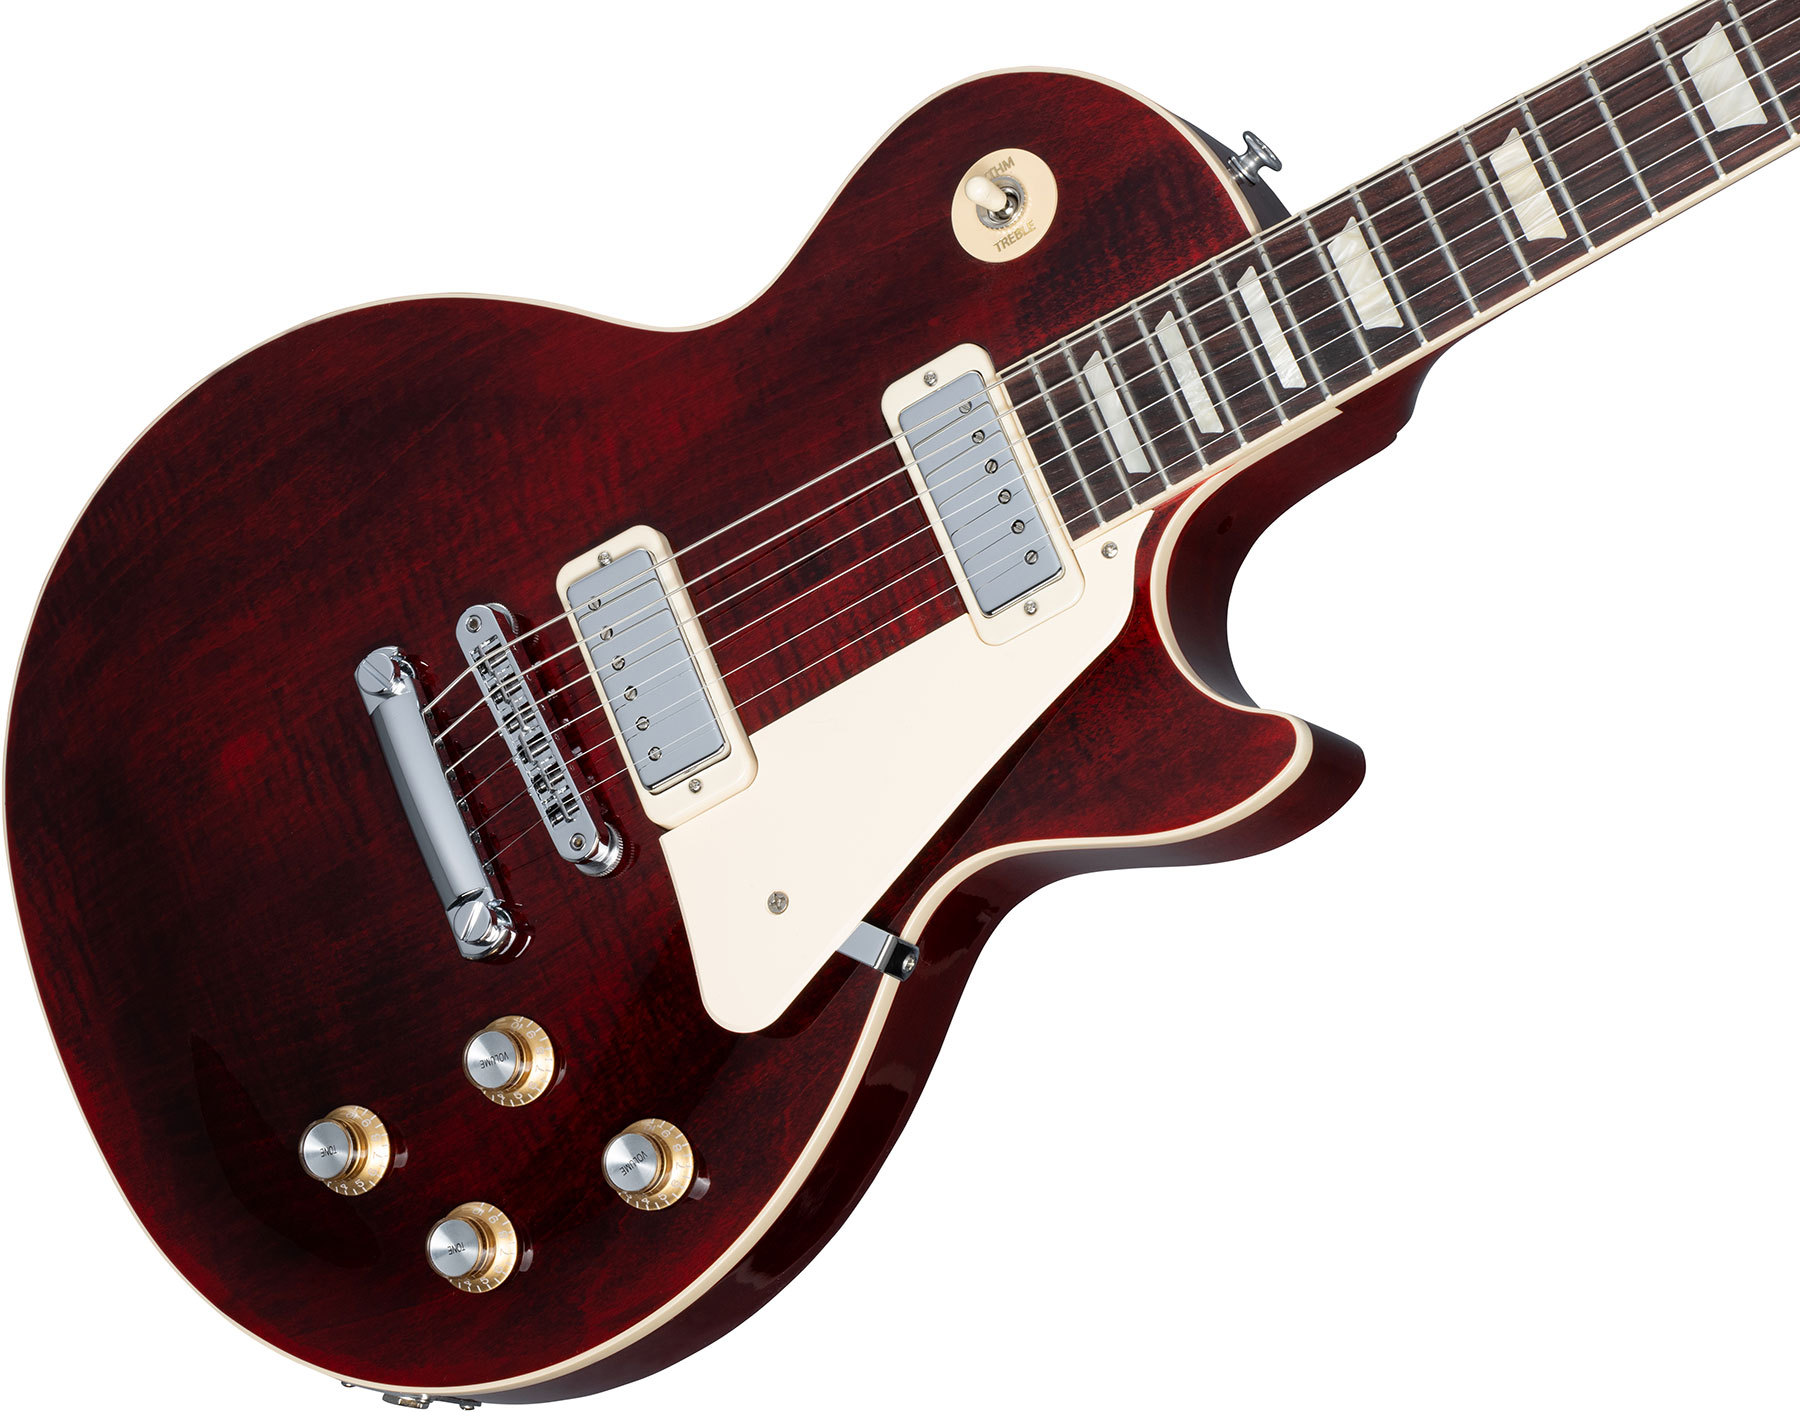 Gibson Les Paul Deluxe 70s Plain Top Original 2mh Ht Rw - Wine Red - Single cut electric guitar - Variation 3